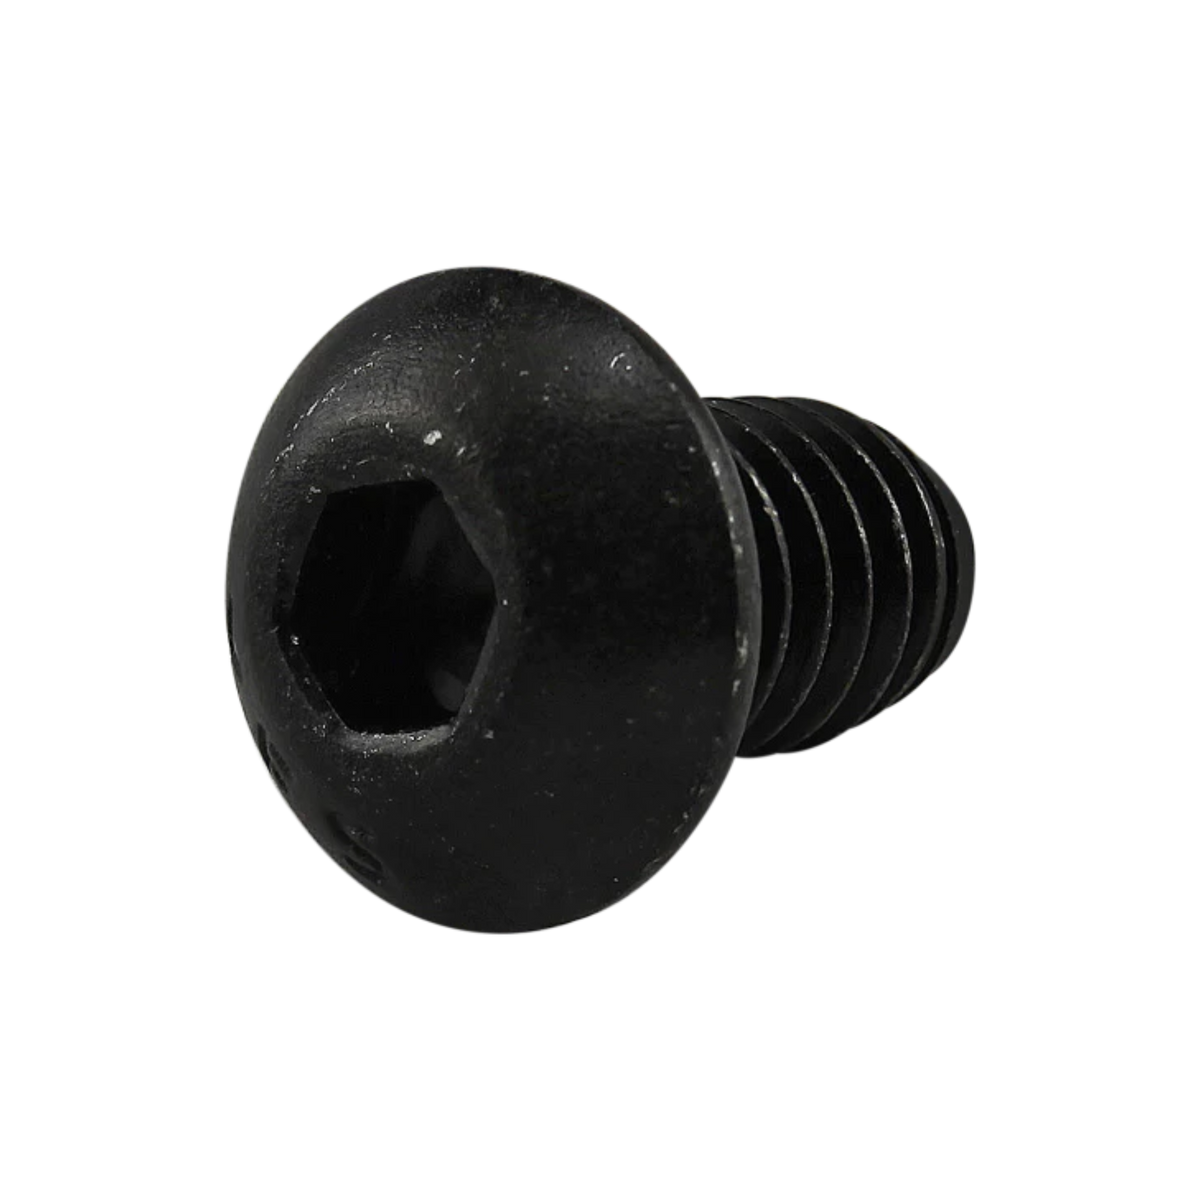 side view of a black screw with a hex head on the left and short threaded stem on the right